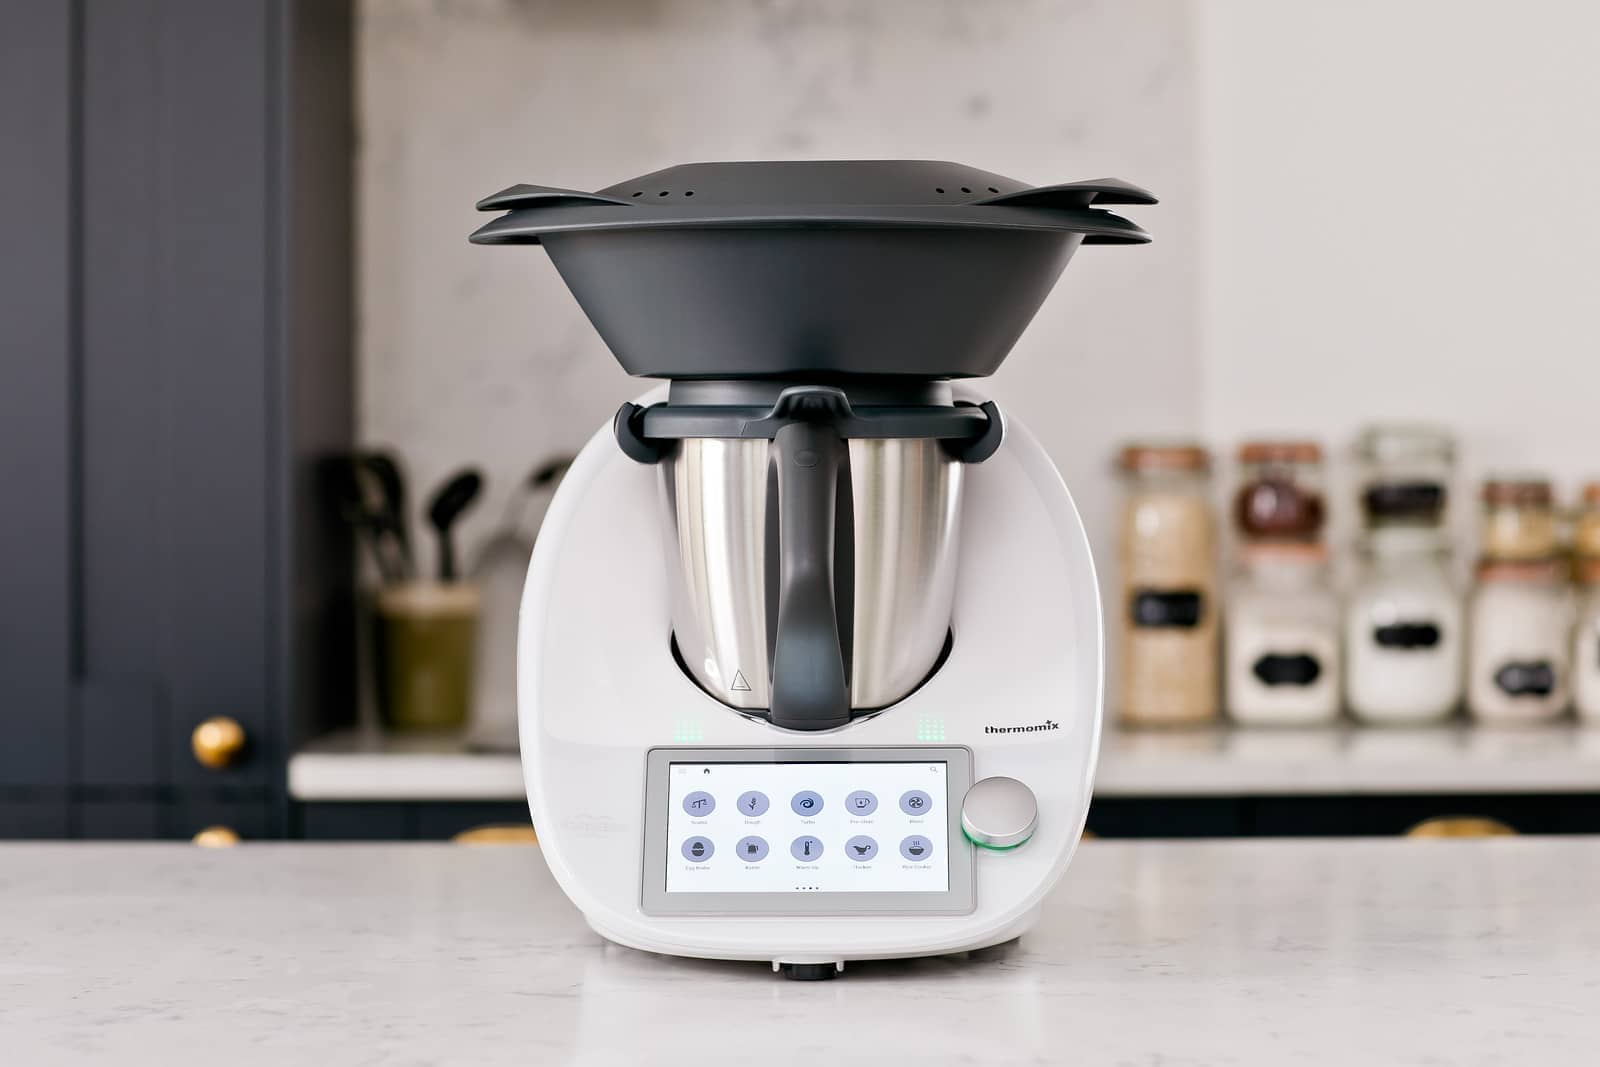 Why the Aga classes have fallen for the Thermomix